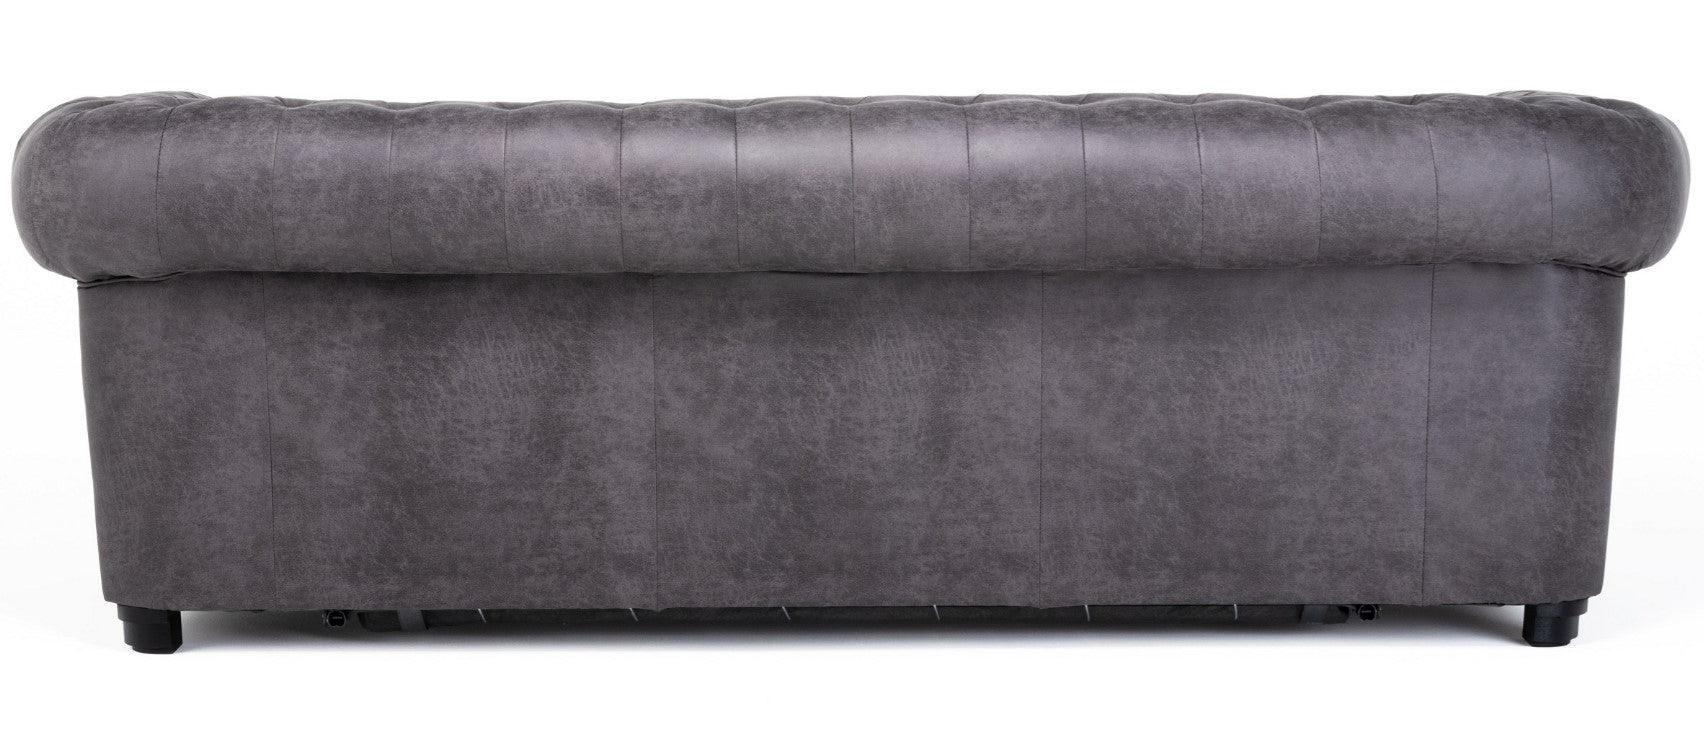 Arnside Suede Chesterfield Sofa CollectionSuites and sofasLakeland Sofa Warehouse 